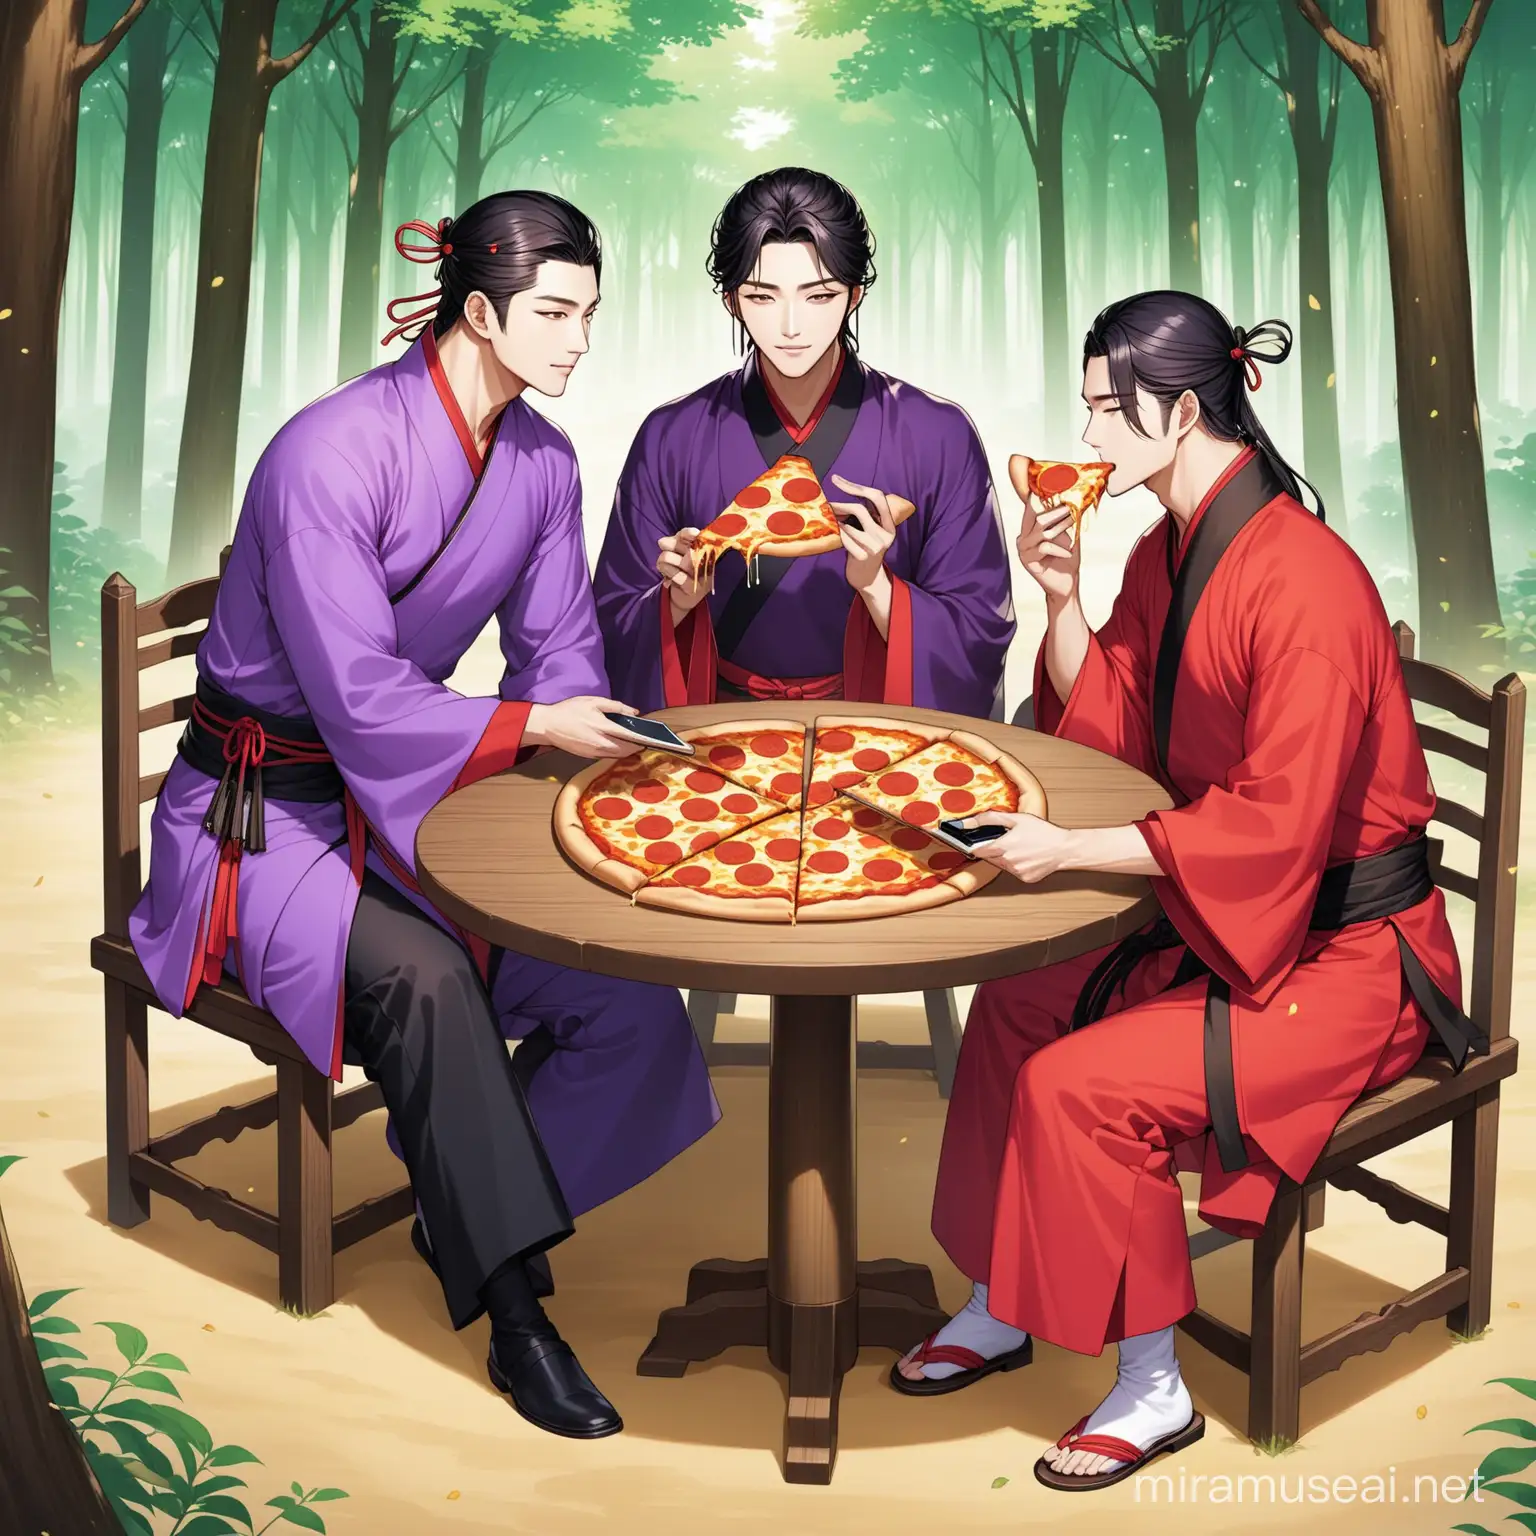 The background is the forest of the Joseon Dynasty

There is a round table and chairs in the forest

Two handsome men are sitting on chairs eating pizza

The handsome man on the right wears red clothes

The handsome man on the left wears purple clothes

The handsome man in red is touching his smartphone